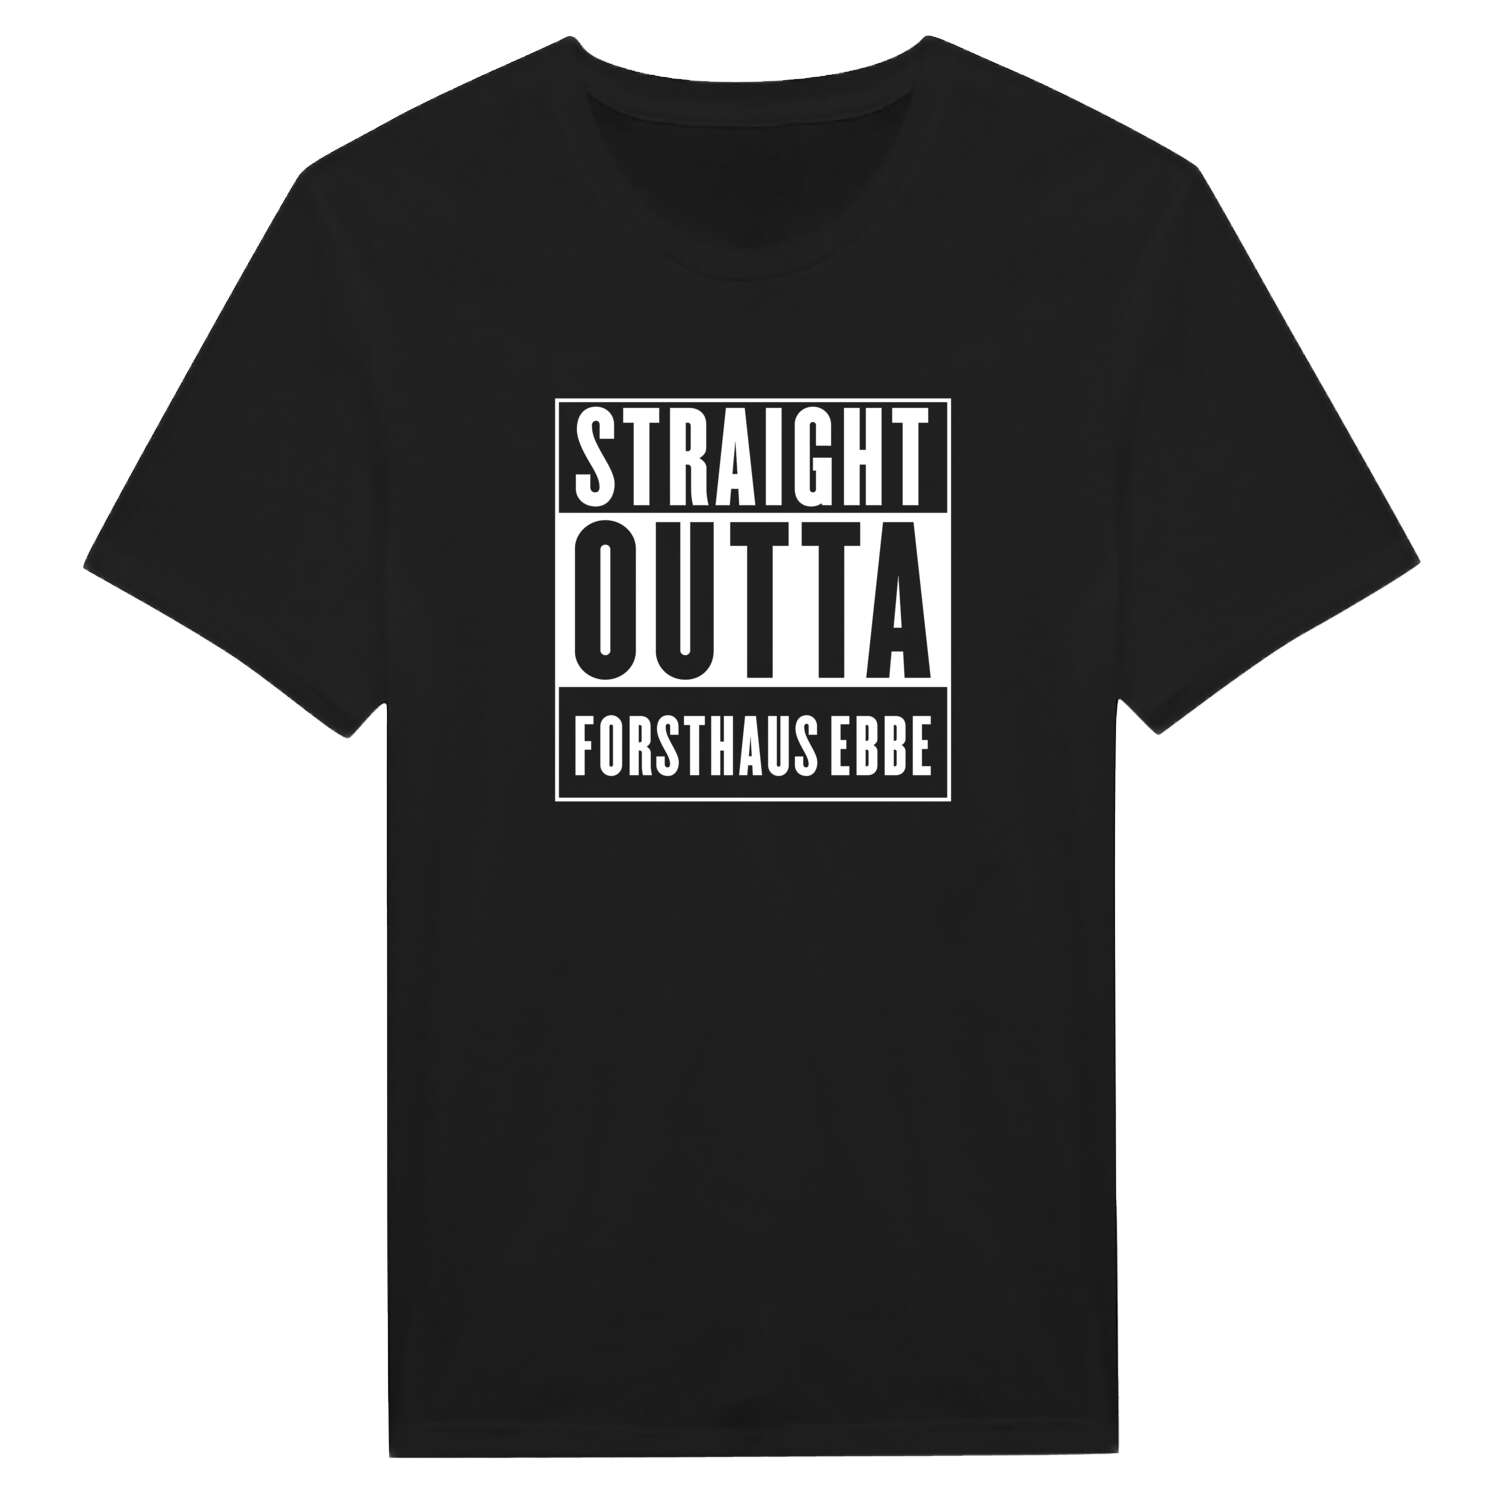 Forsthaus Ebbe T-Shirt »Straight Outta«